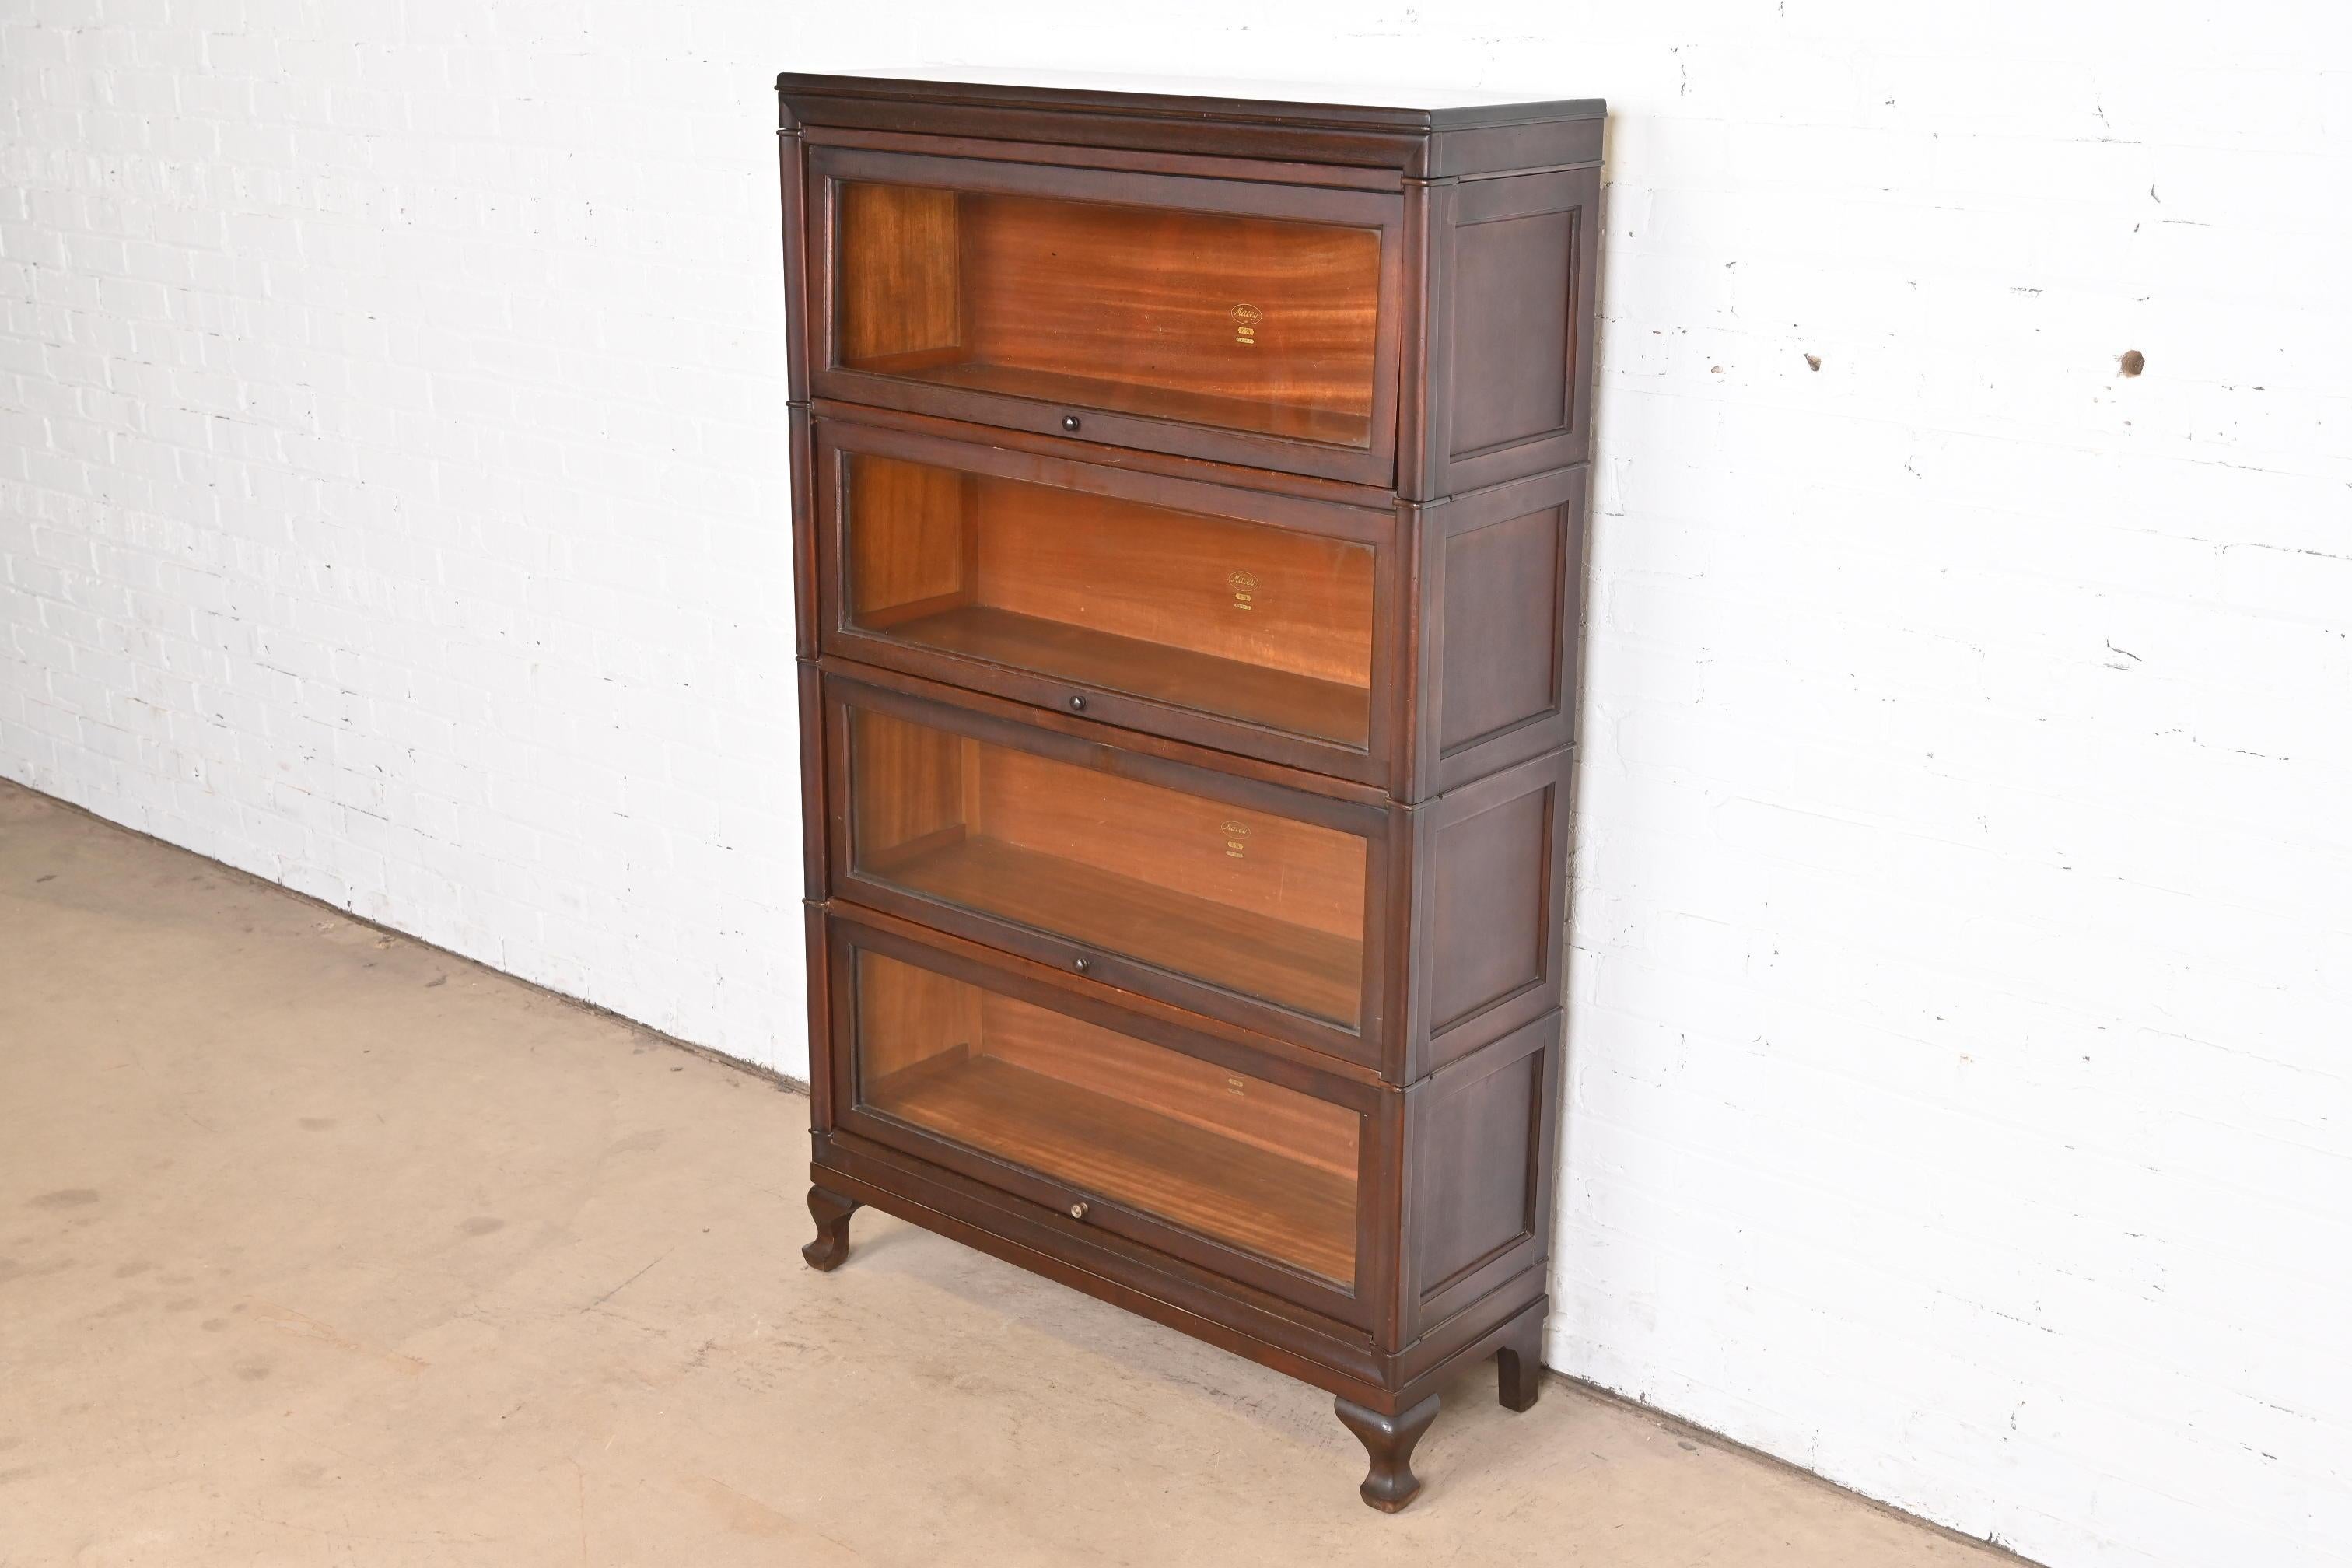 American Antique Arts & Crafts Mahogany Four-Stack Barrister Bookcase by Macey, 1920s For Sale